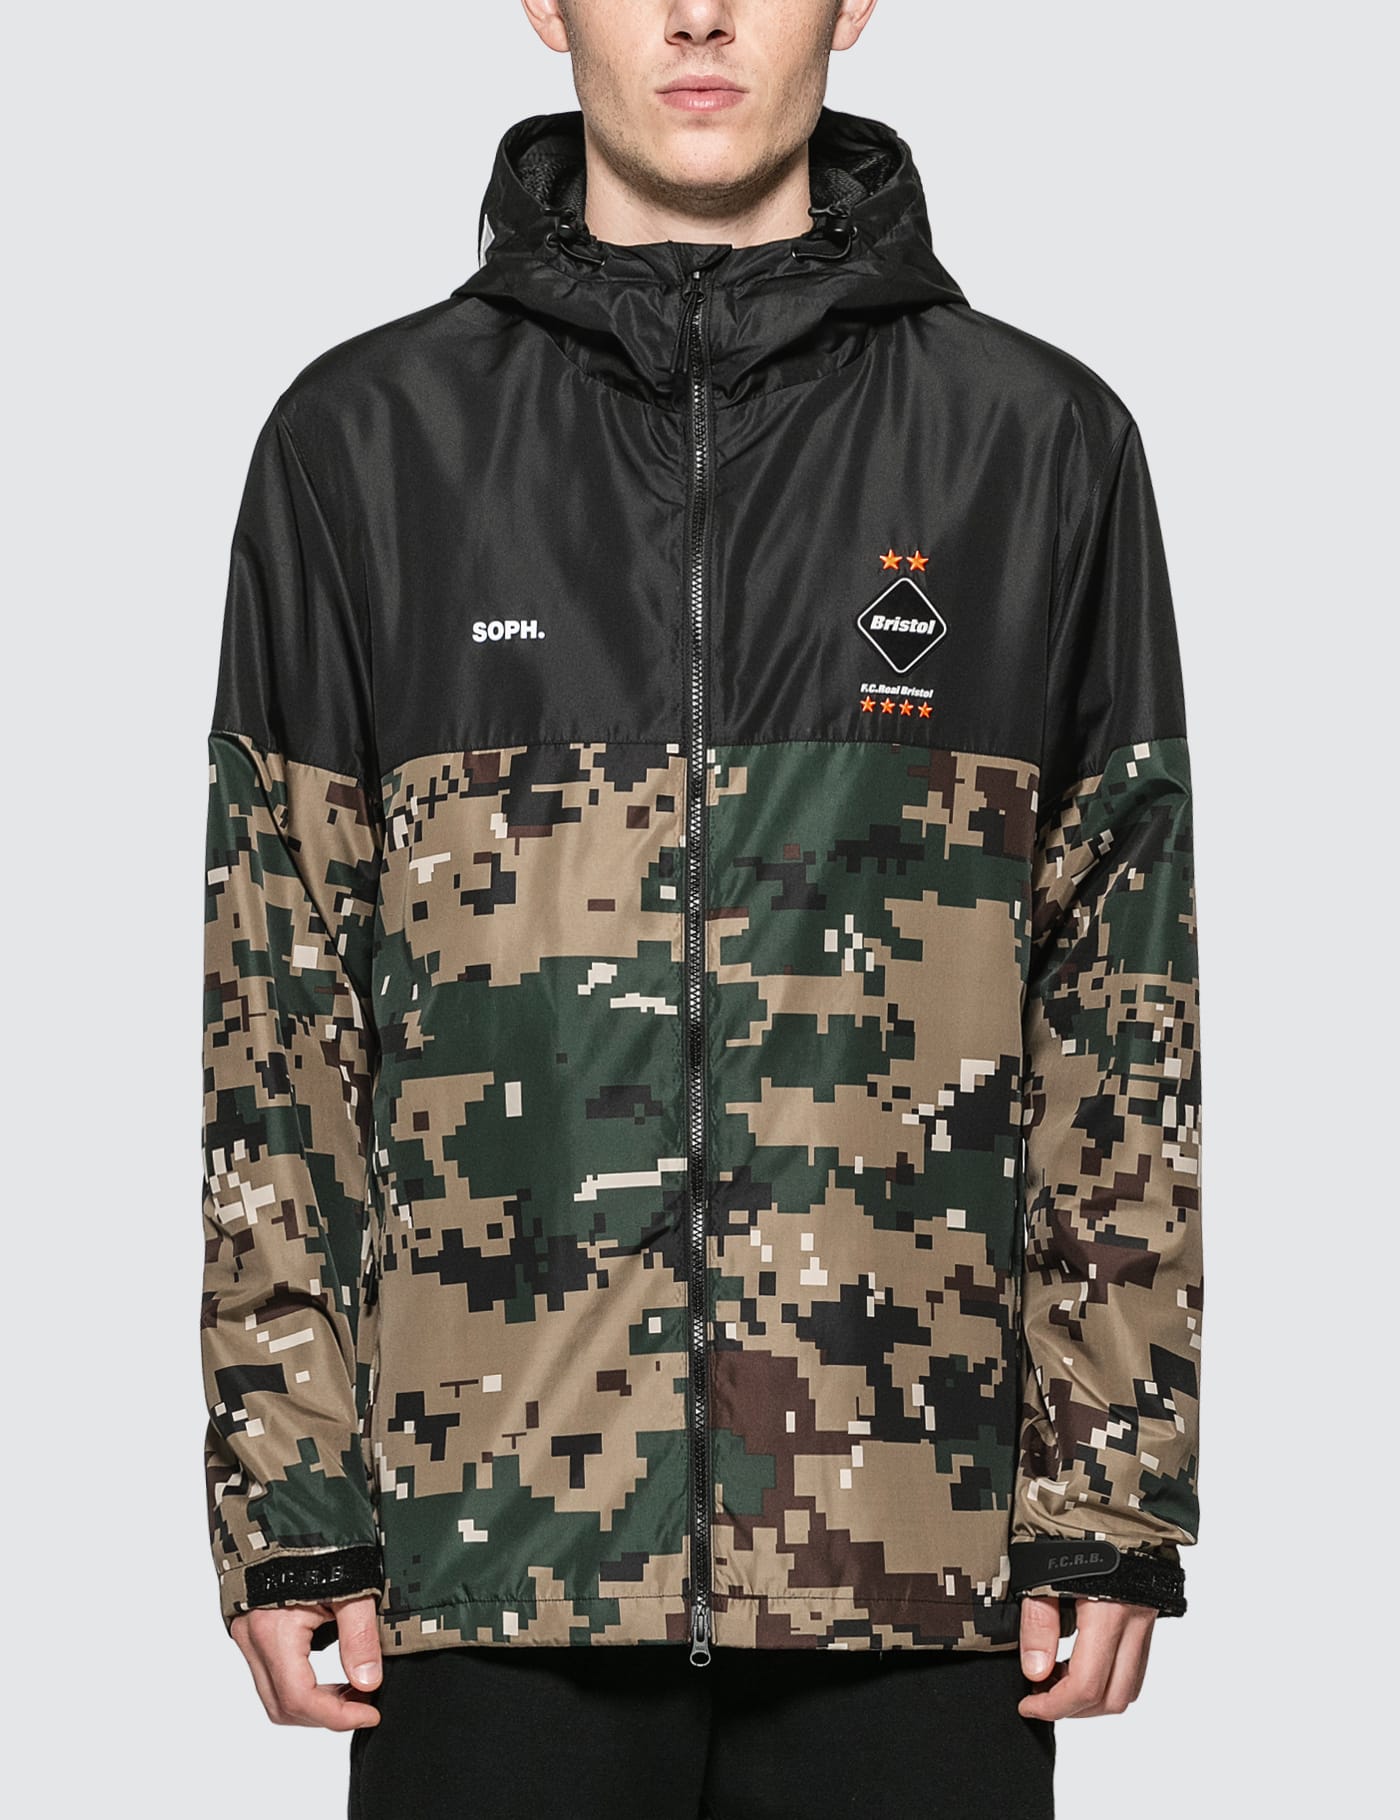 F.C. Real Bristol - Practice Jacket | HBX - Globally Curated